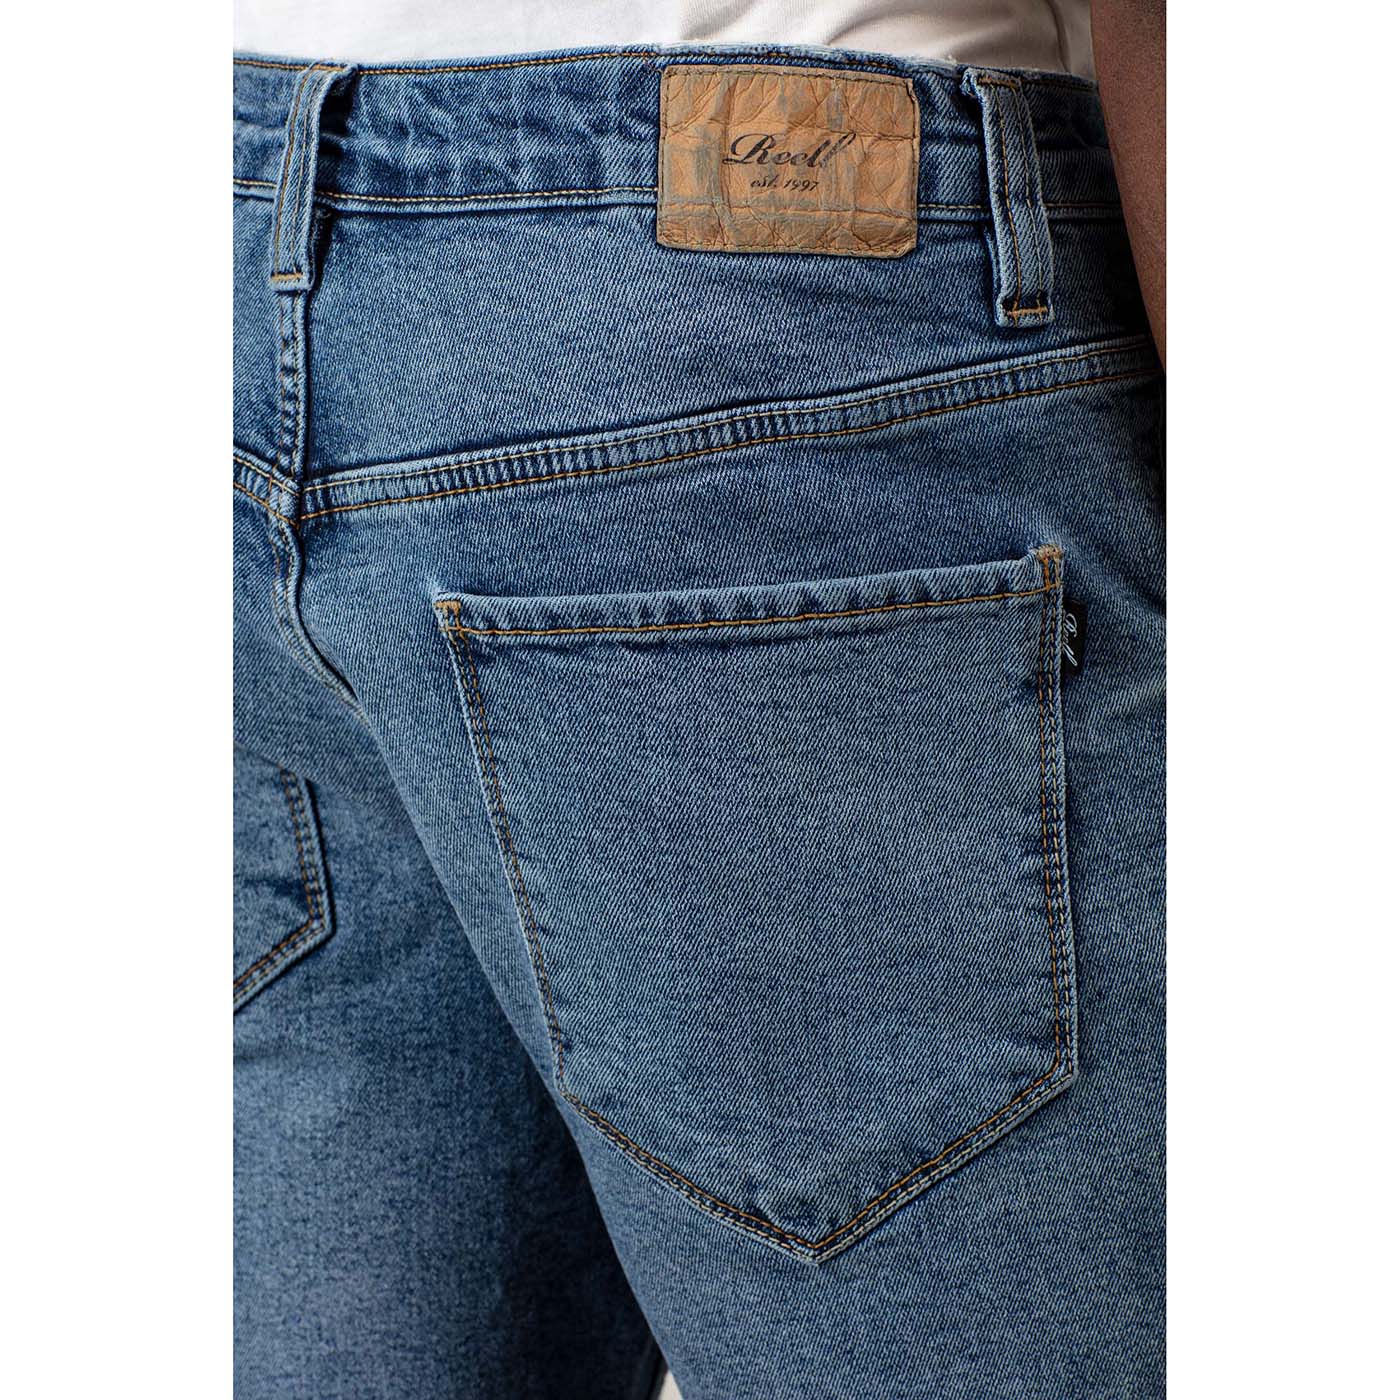 Reell Jeans Rafter Shorts 2 Retro Mid Blue